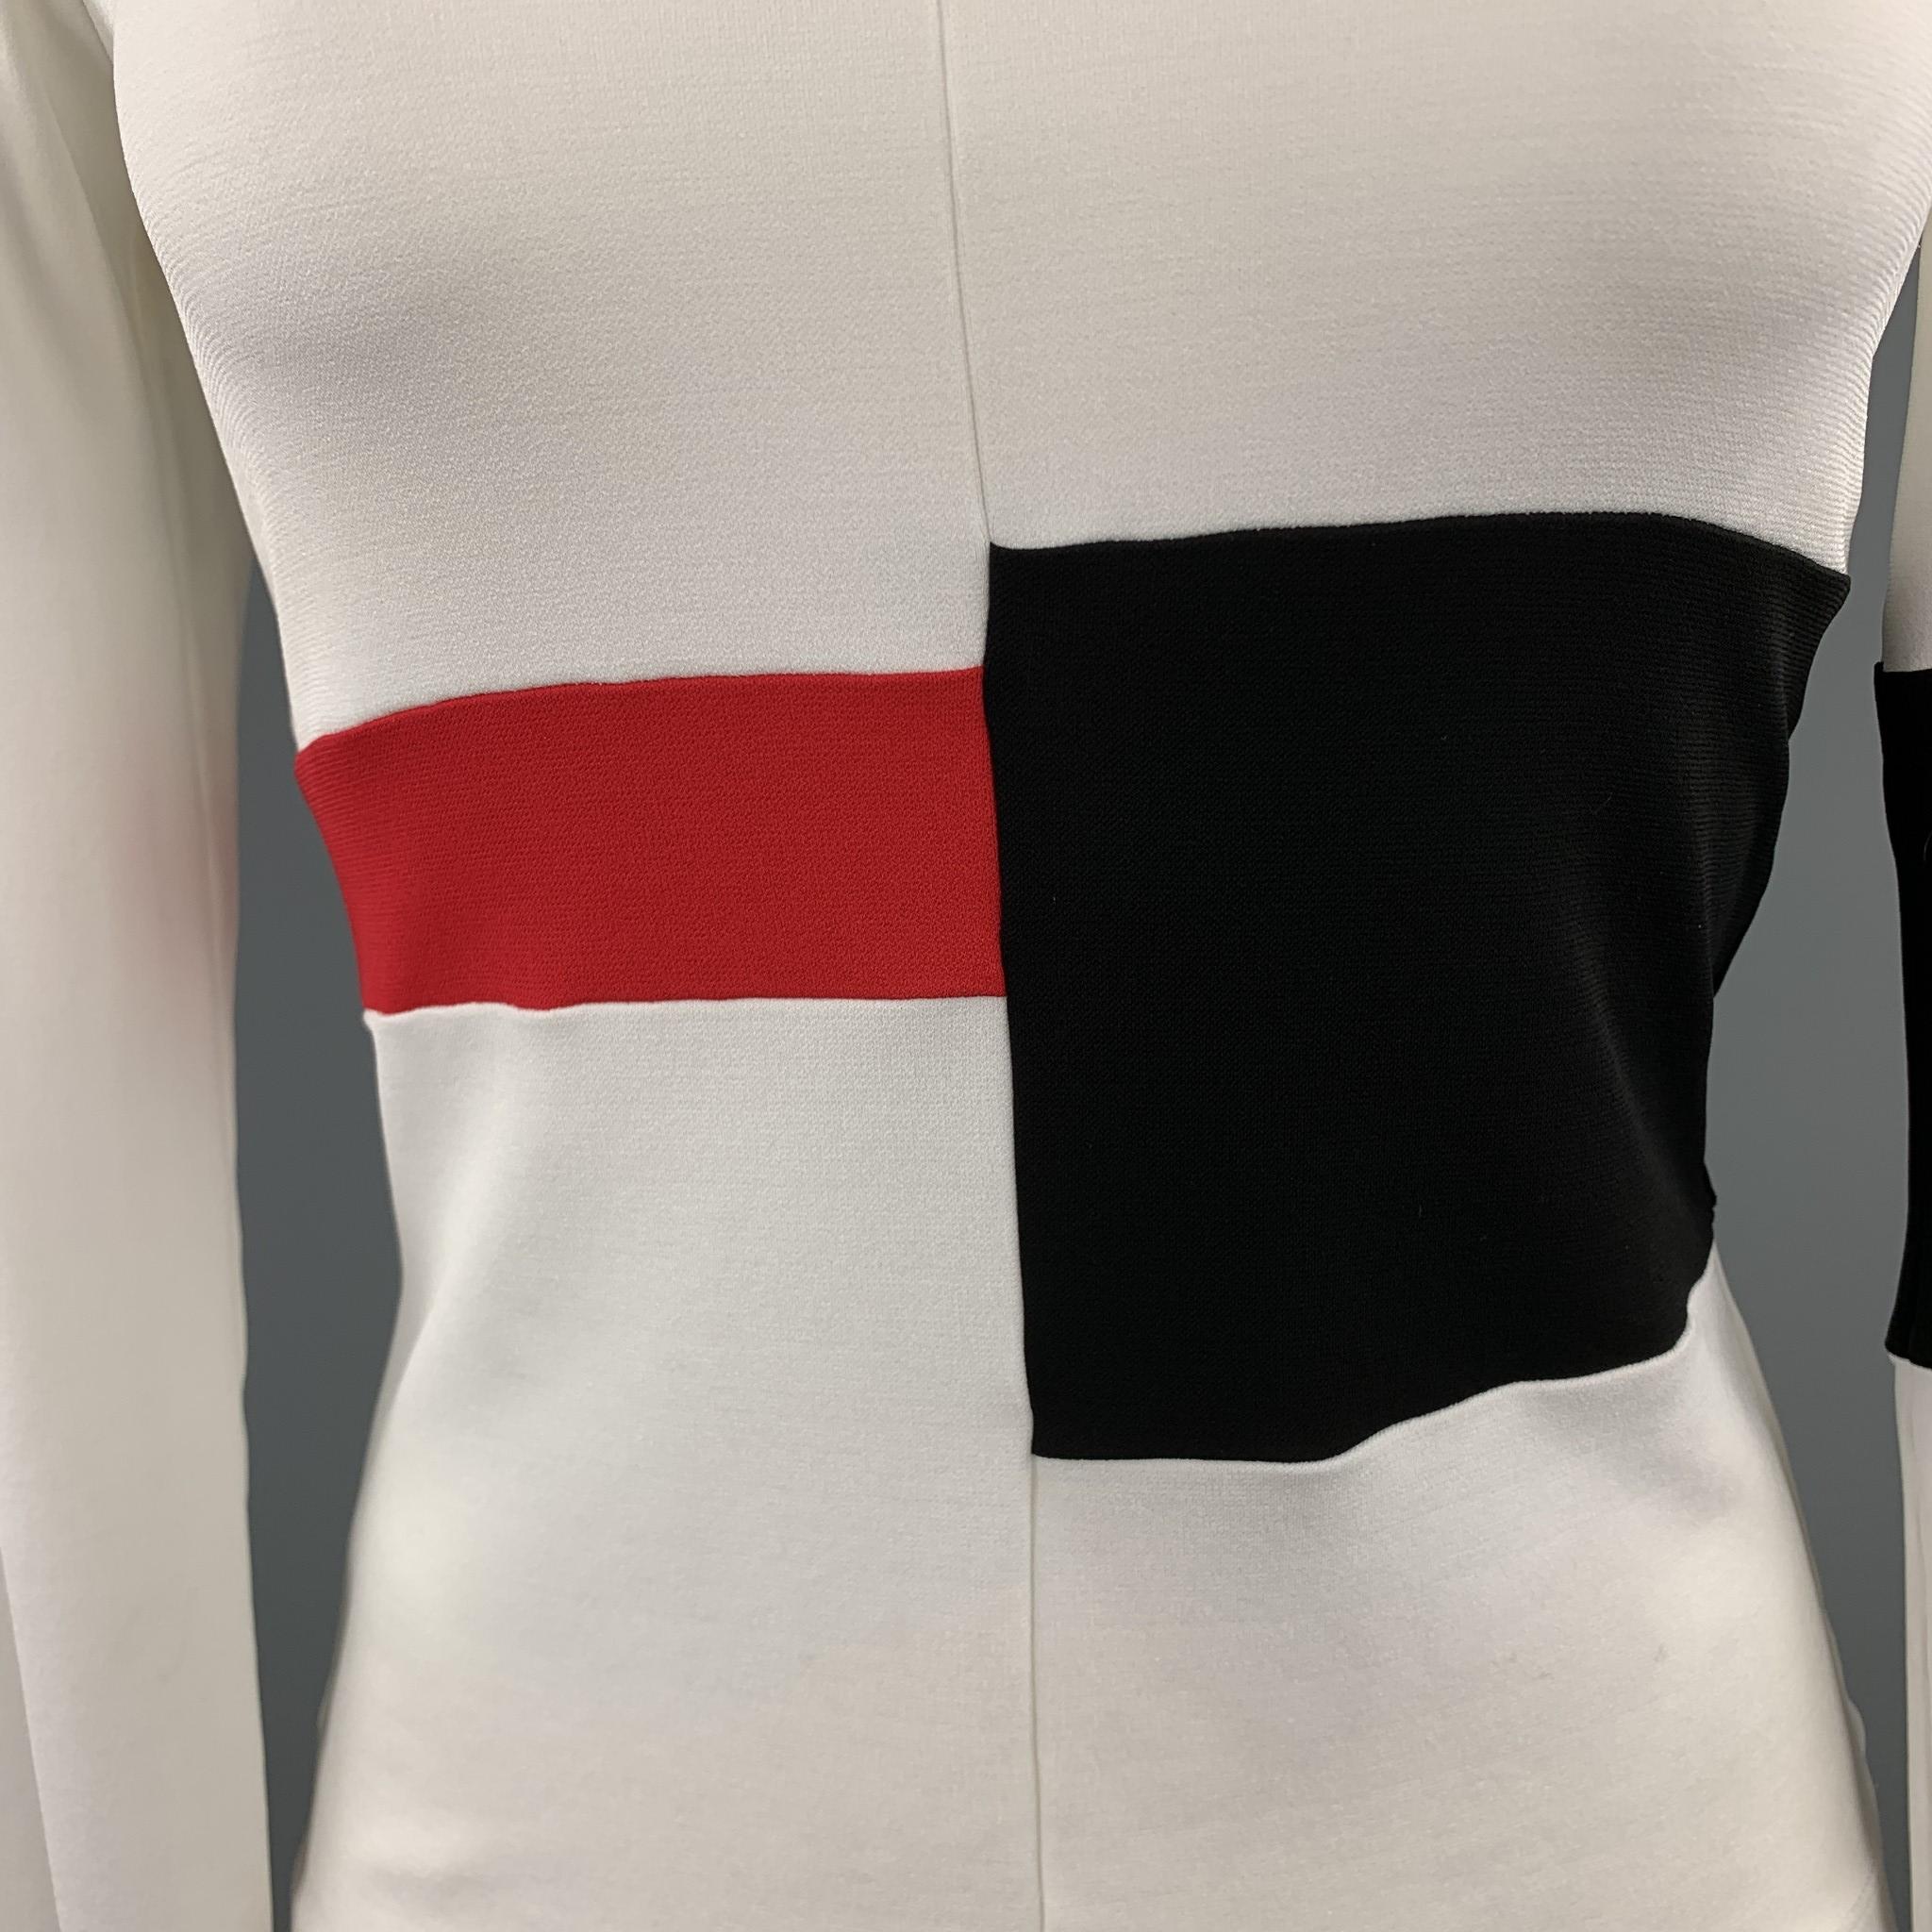 NARCISCO RODRIGUEZ pullover blouse comes in cream crepe stretch chiffon with red and black geometric color block panels.  Wear throughout. Made in Italy.

Very Good Pre-Owned Condition.
Marked: USA 6

Measurements:

Shoulder: 15 in.
Bust: 34